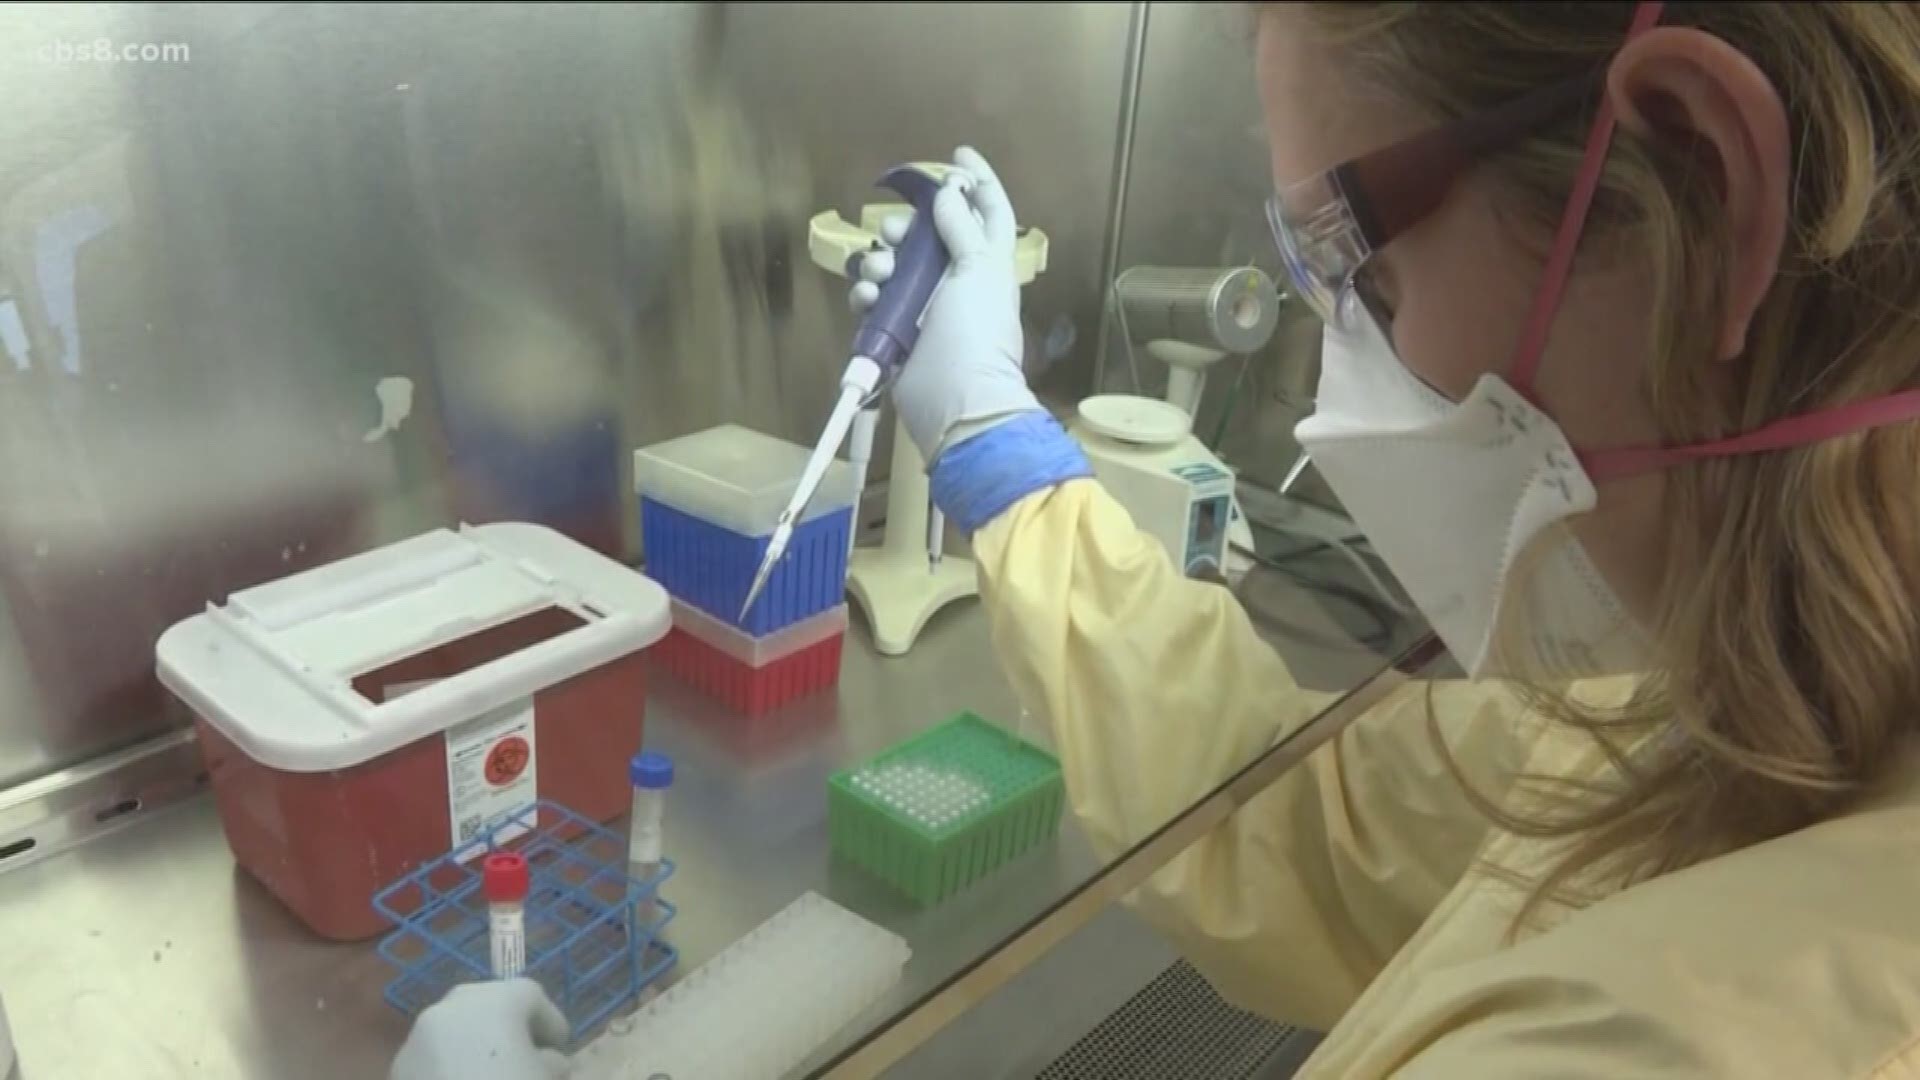 New regulations will go into effect Tuesday in an effort to slow the spread of coronavirus.